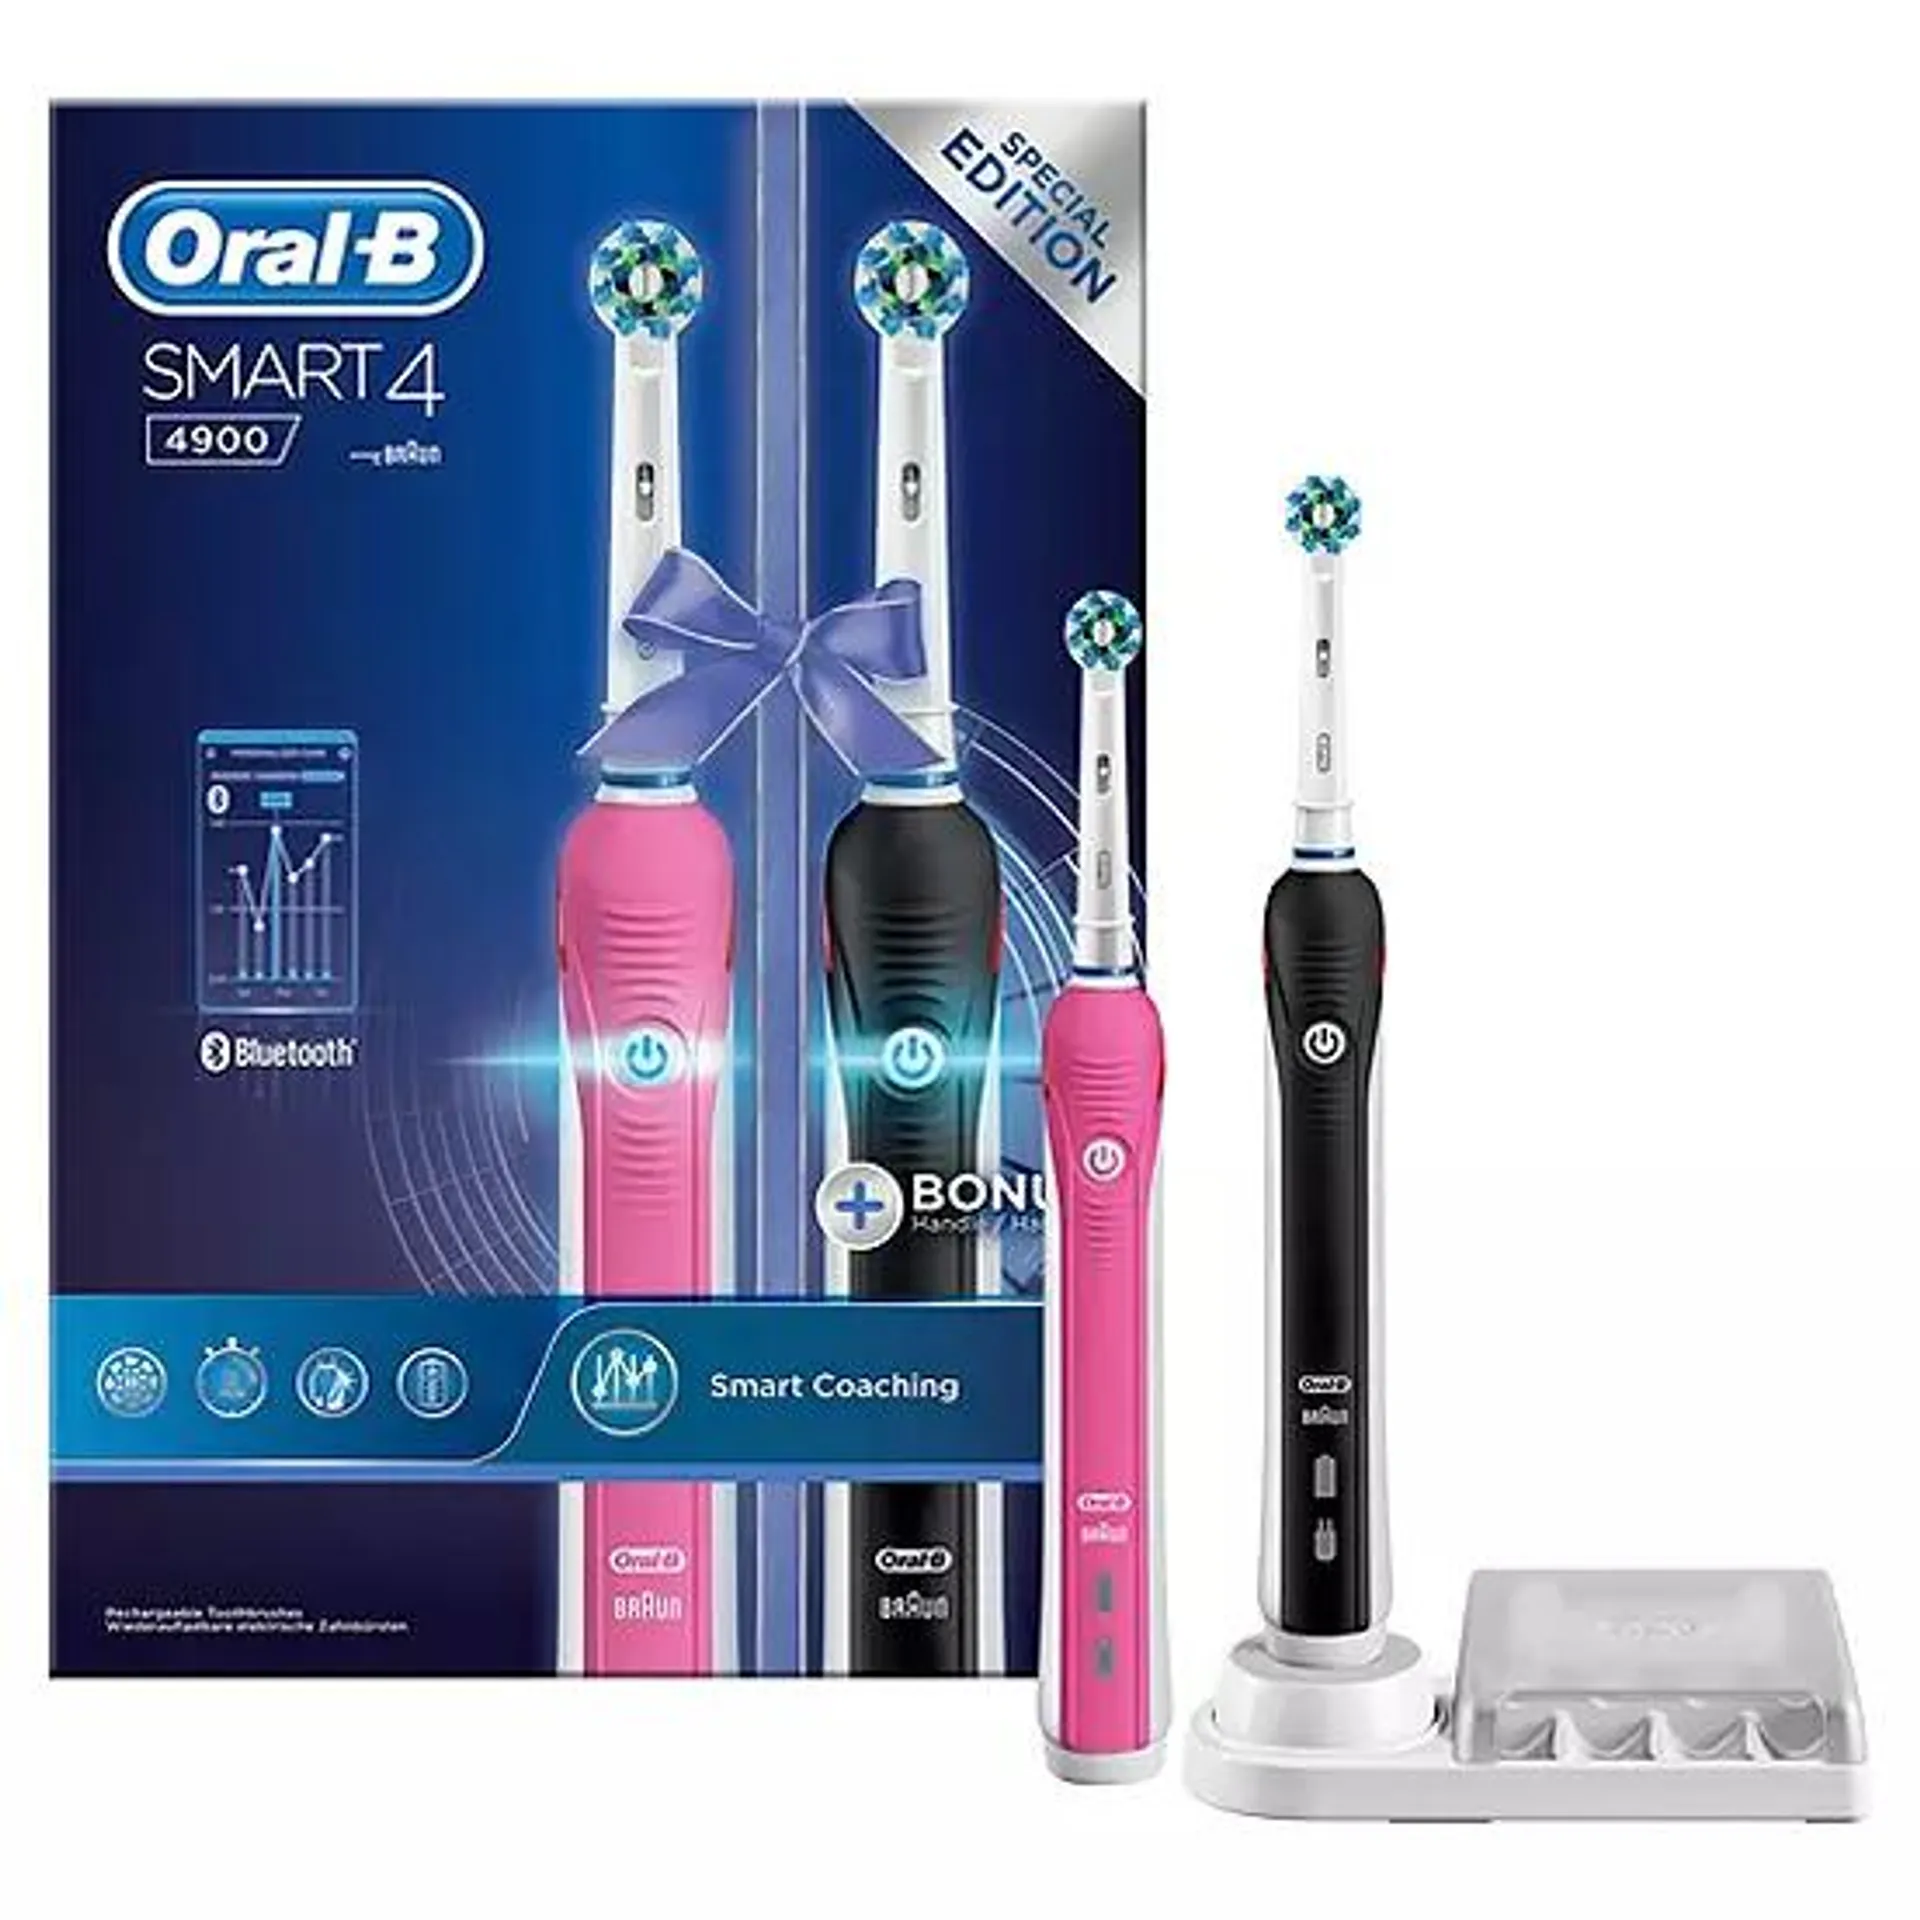 Oral-B Smart 4 4900 Electric Toothbrush DUO Pack Powered By Braun